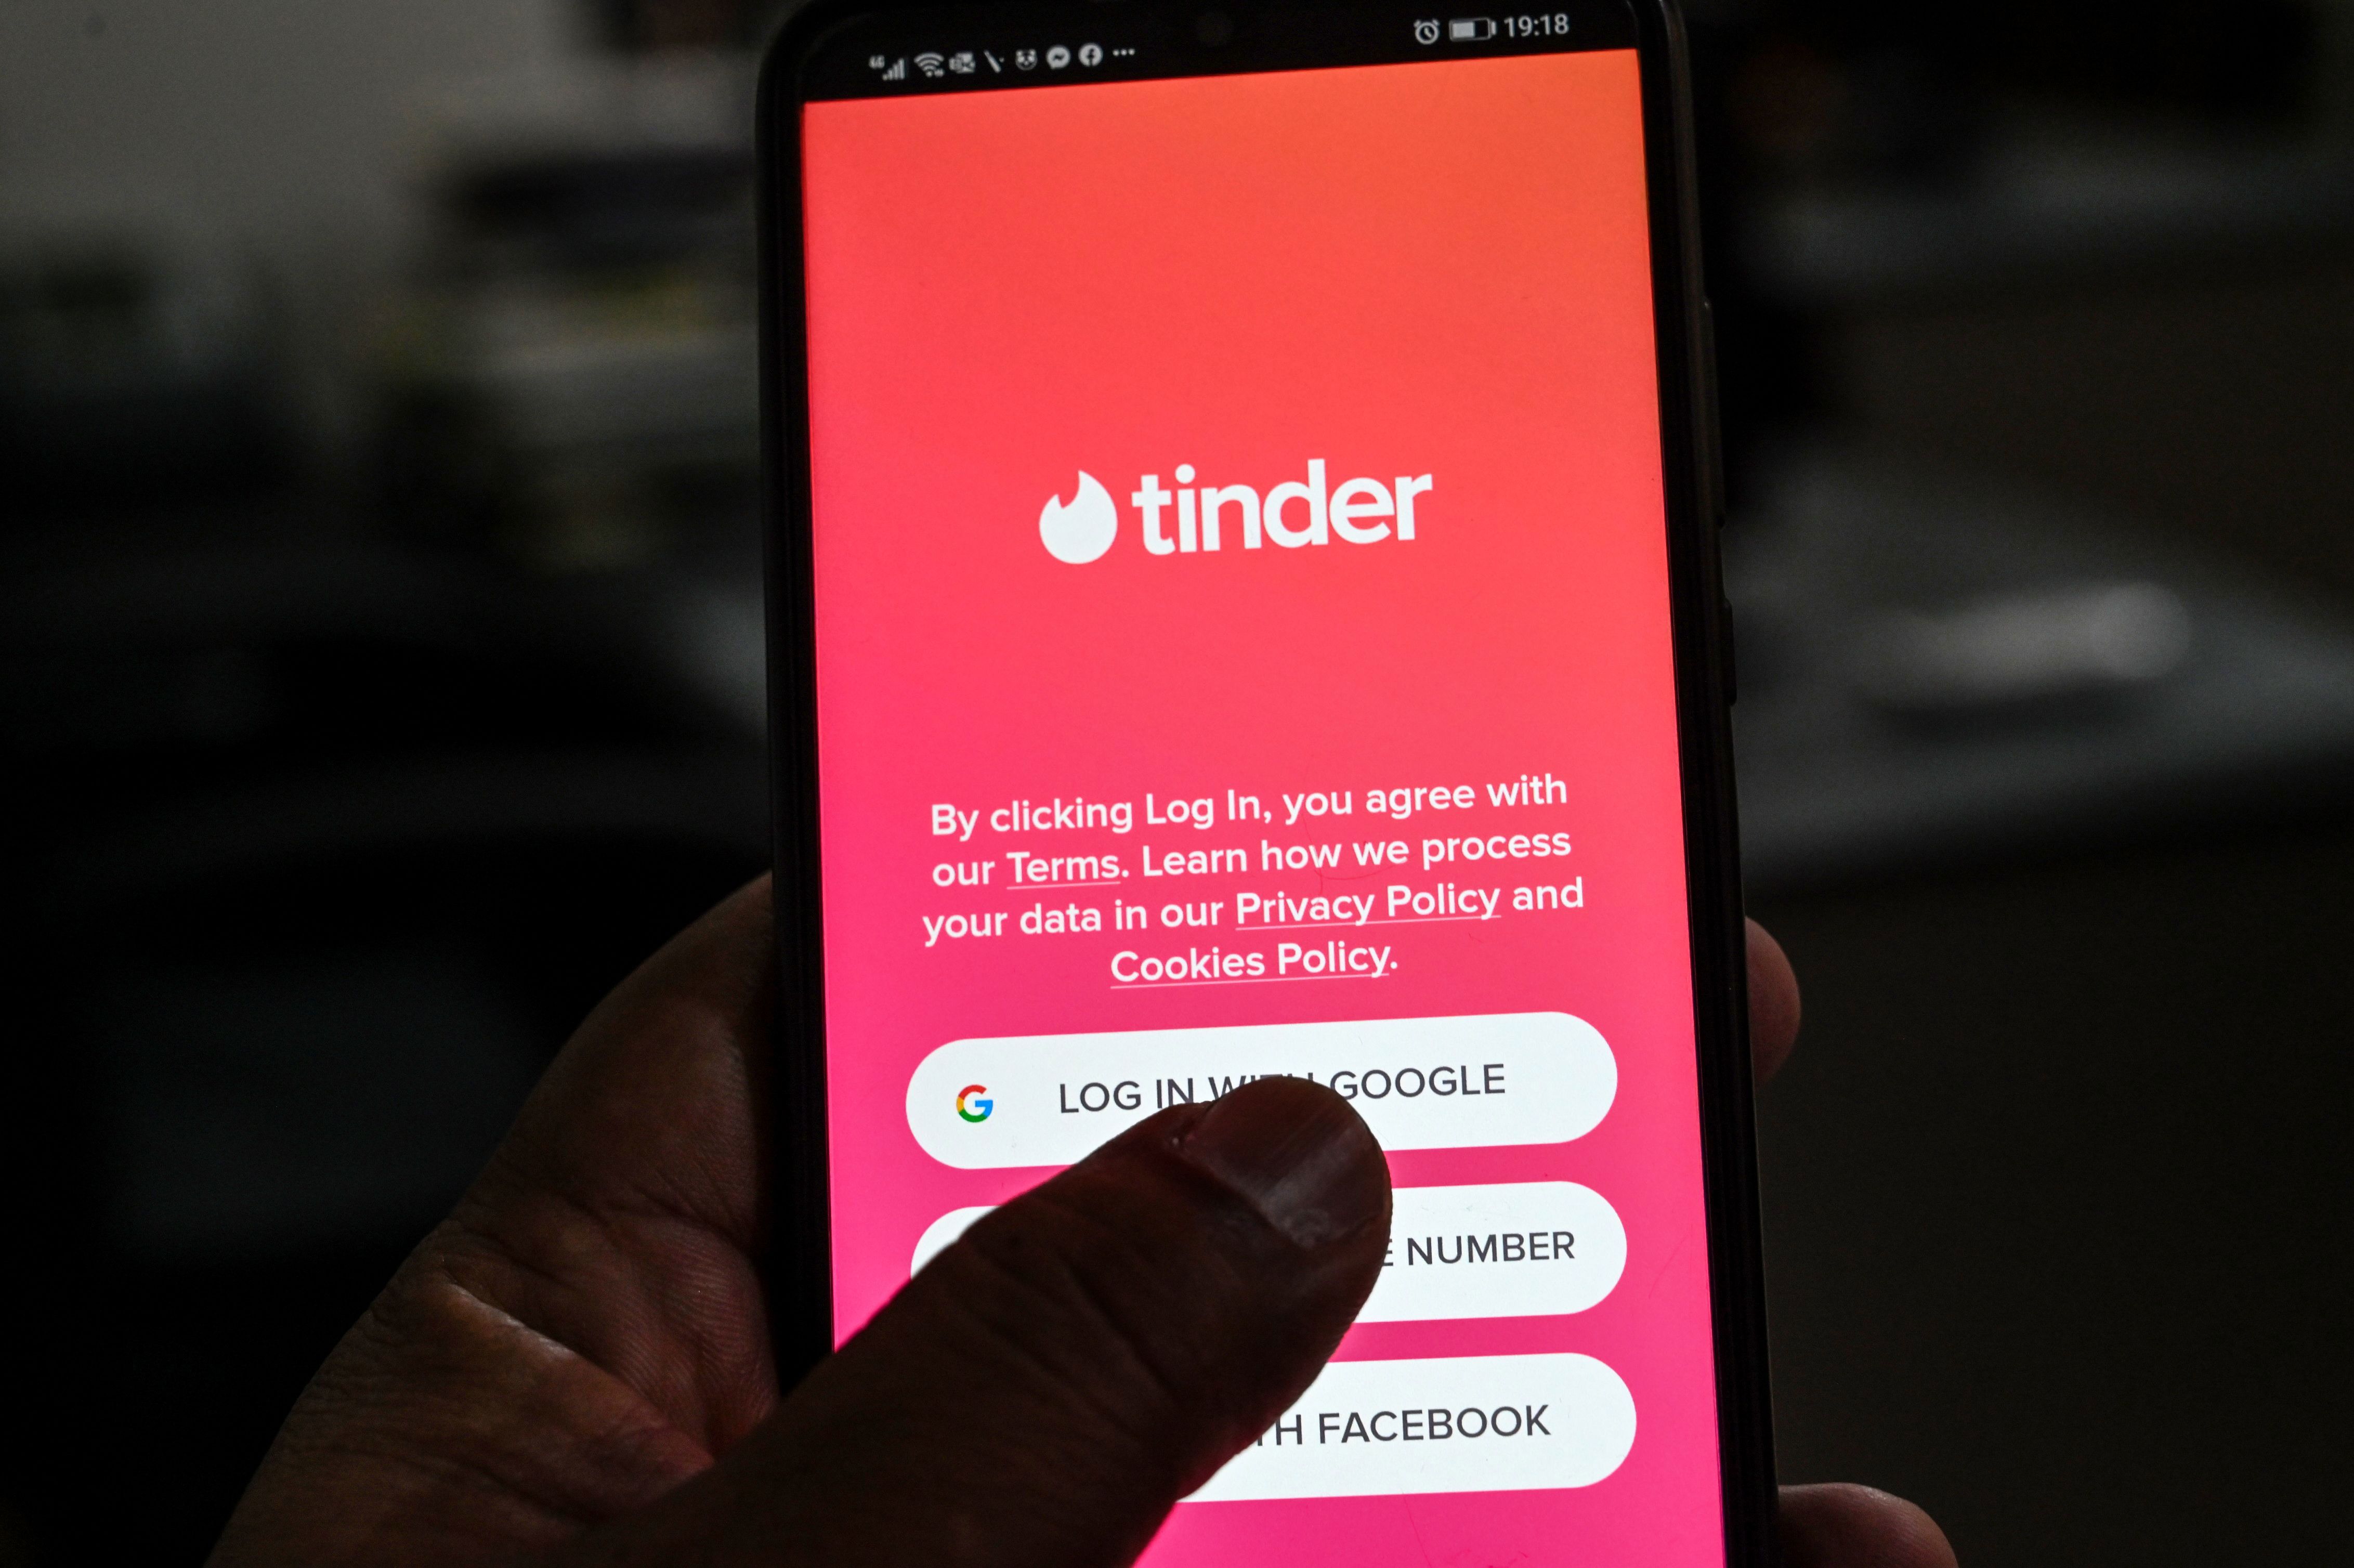 Tinder is bypassing the Play Store payments to avoid Google's Tax